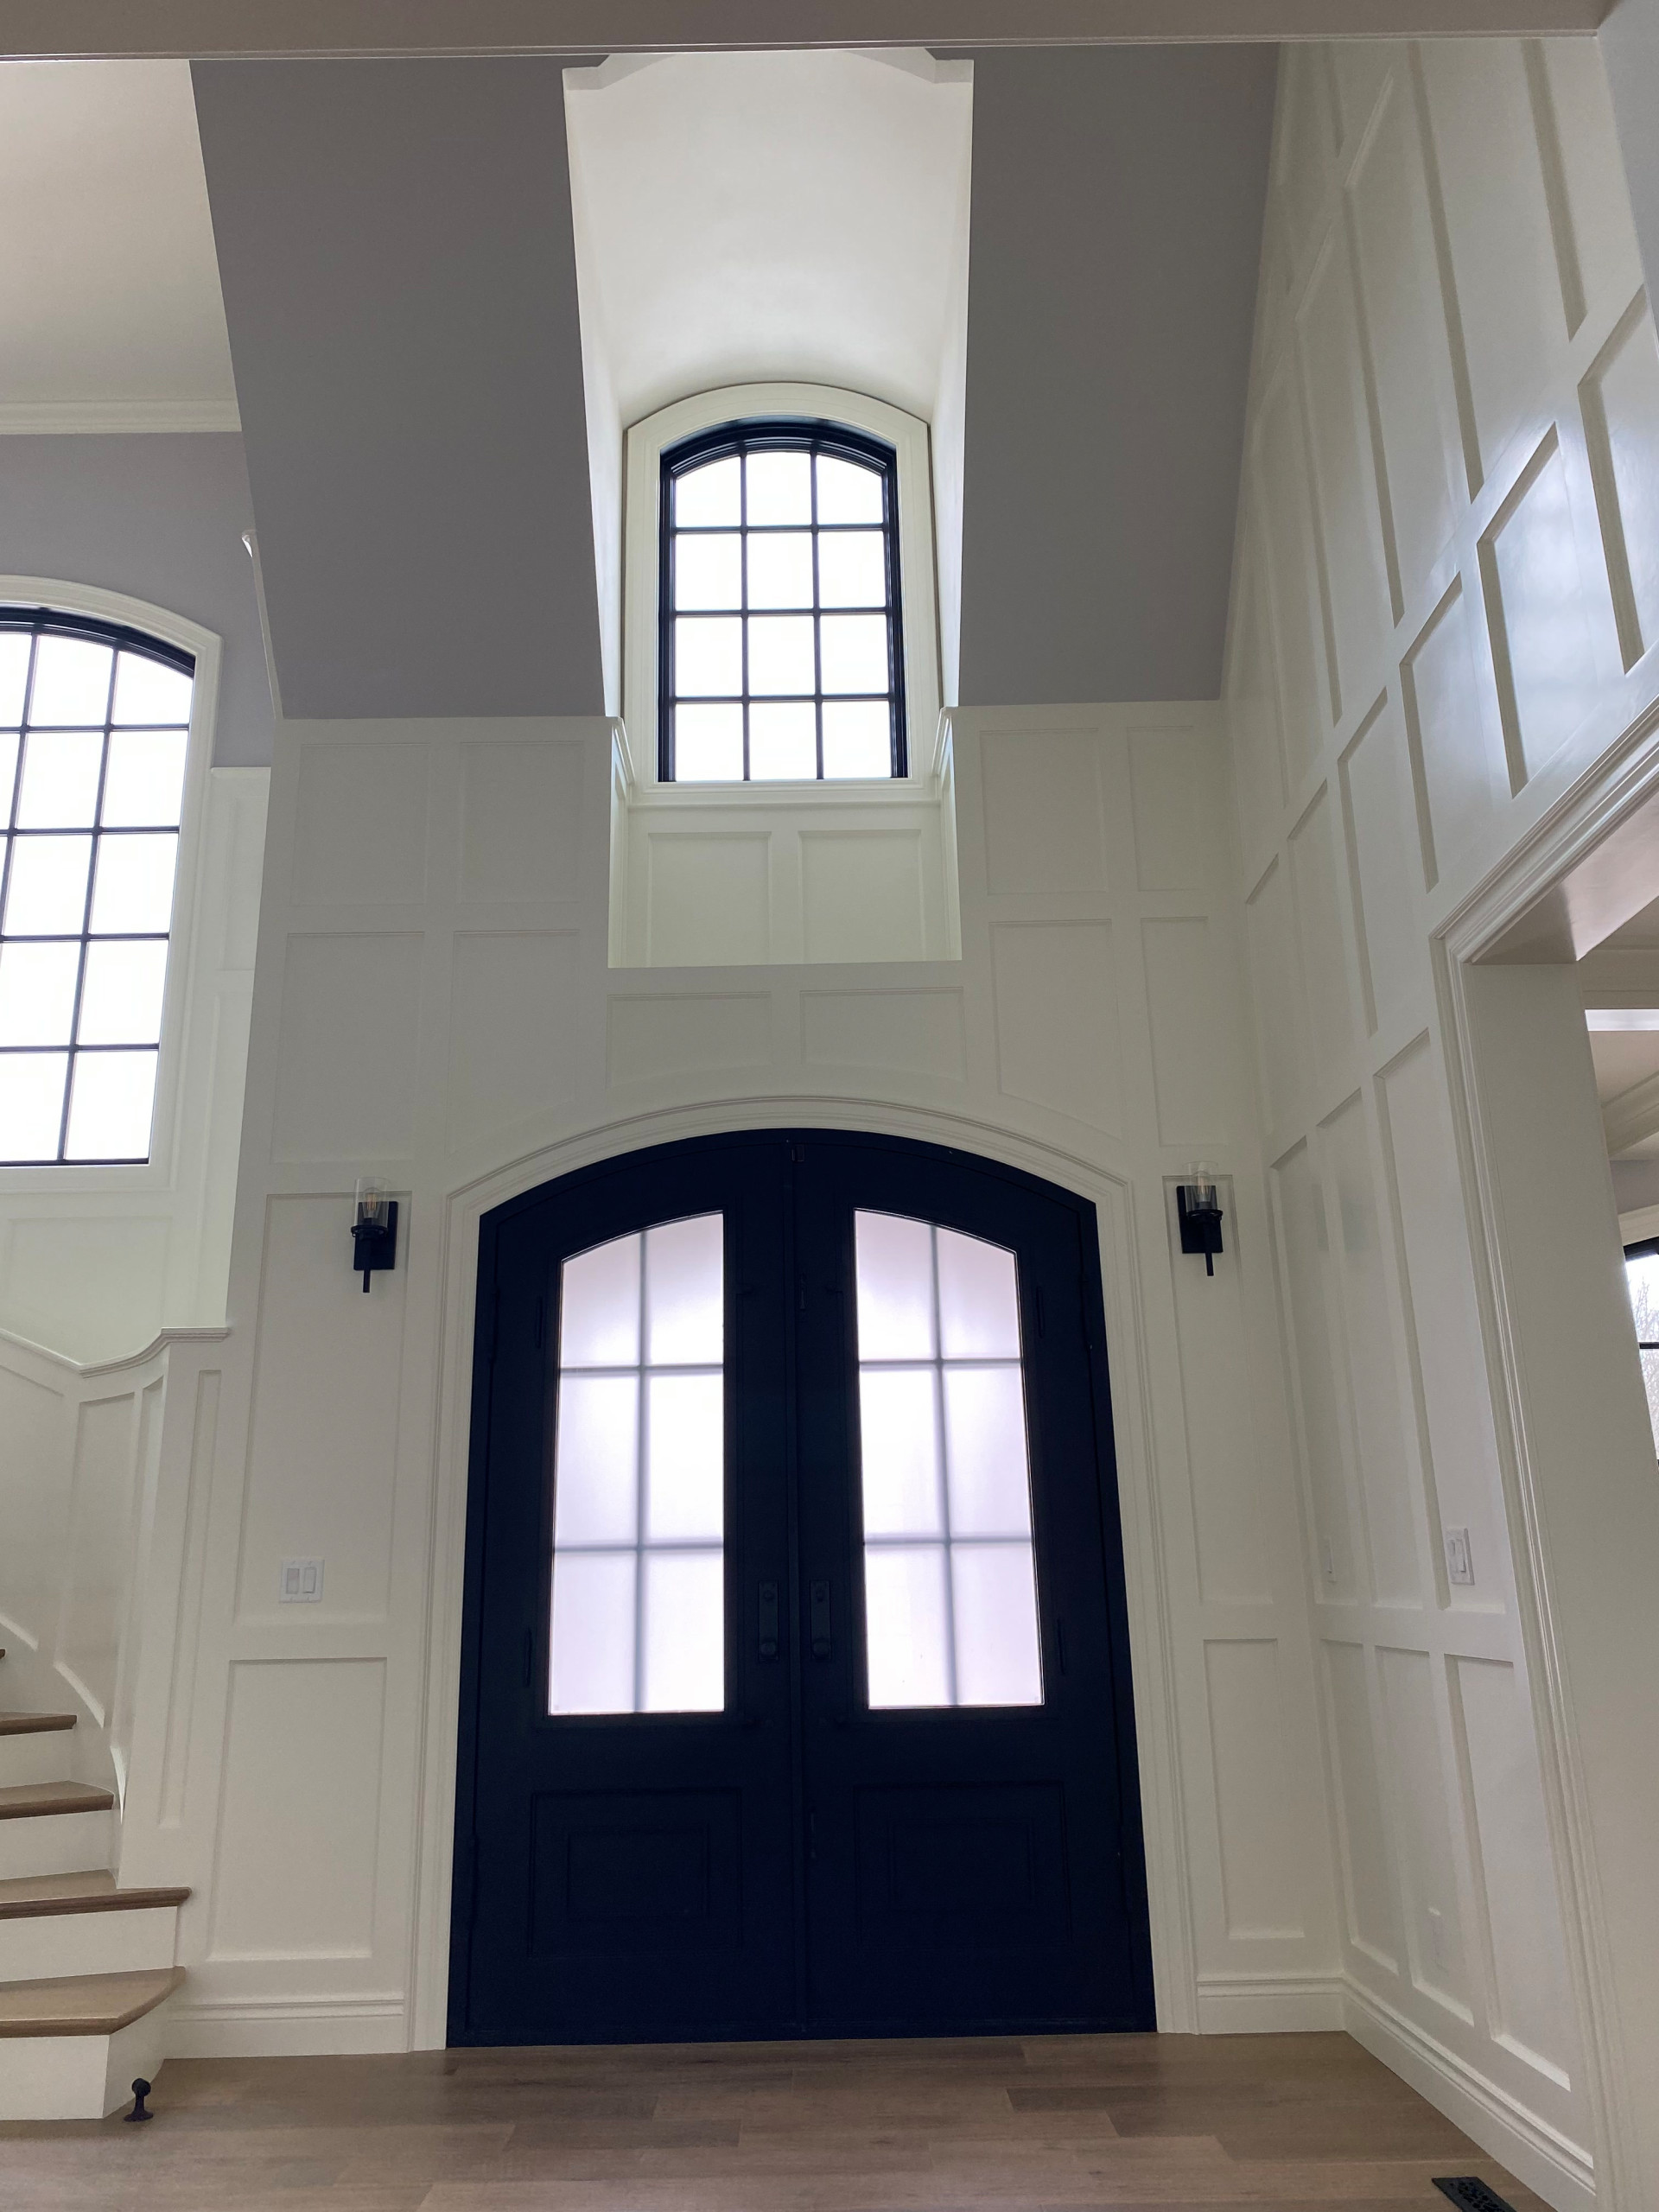 2-story entry with white painted Wainscoting